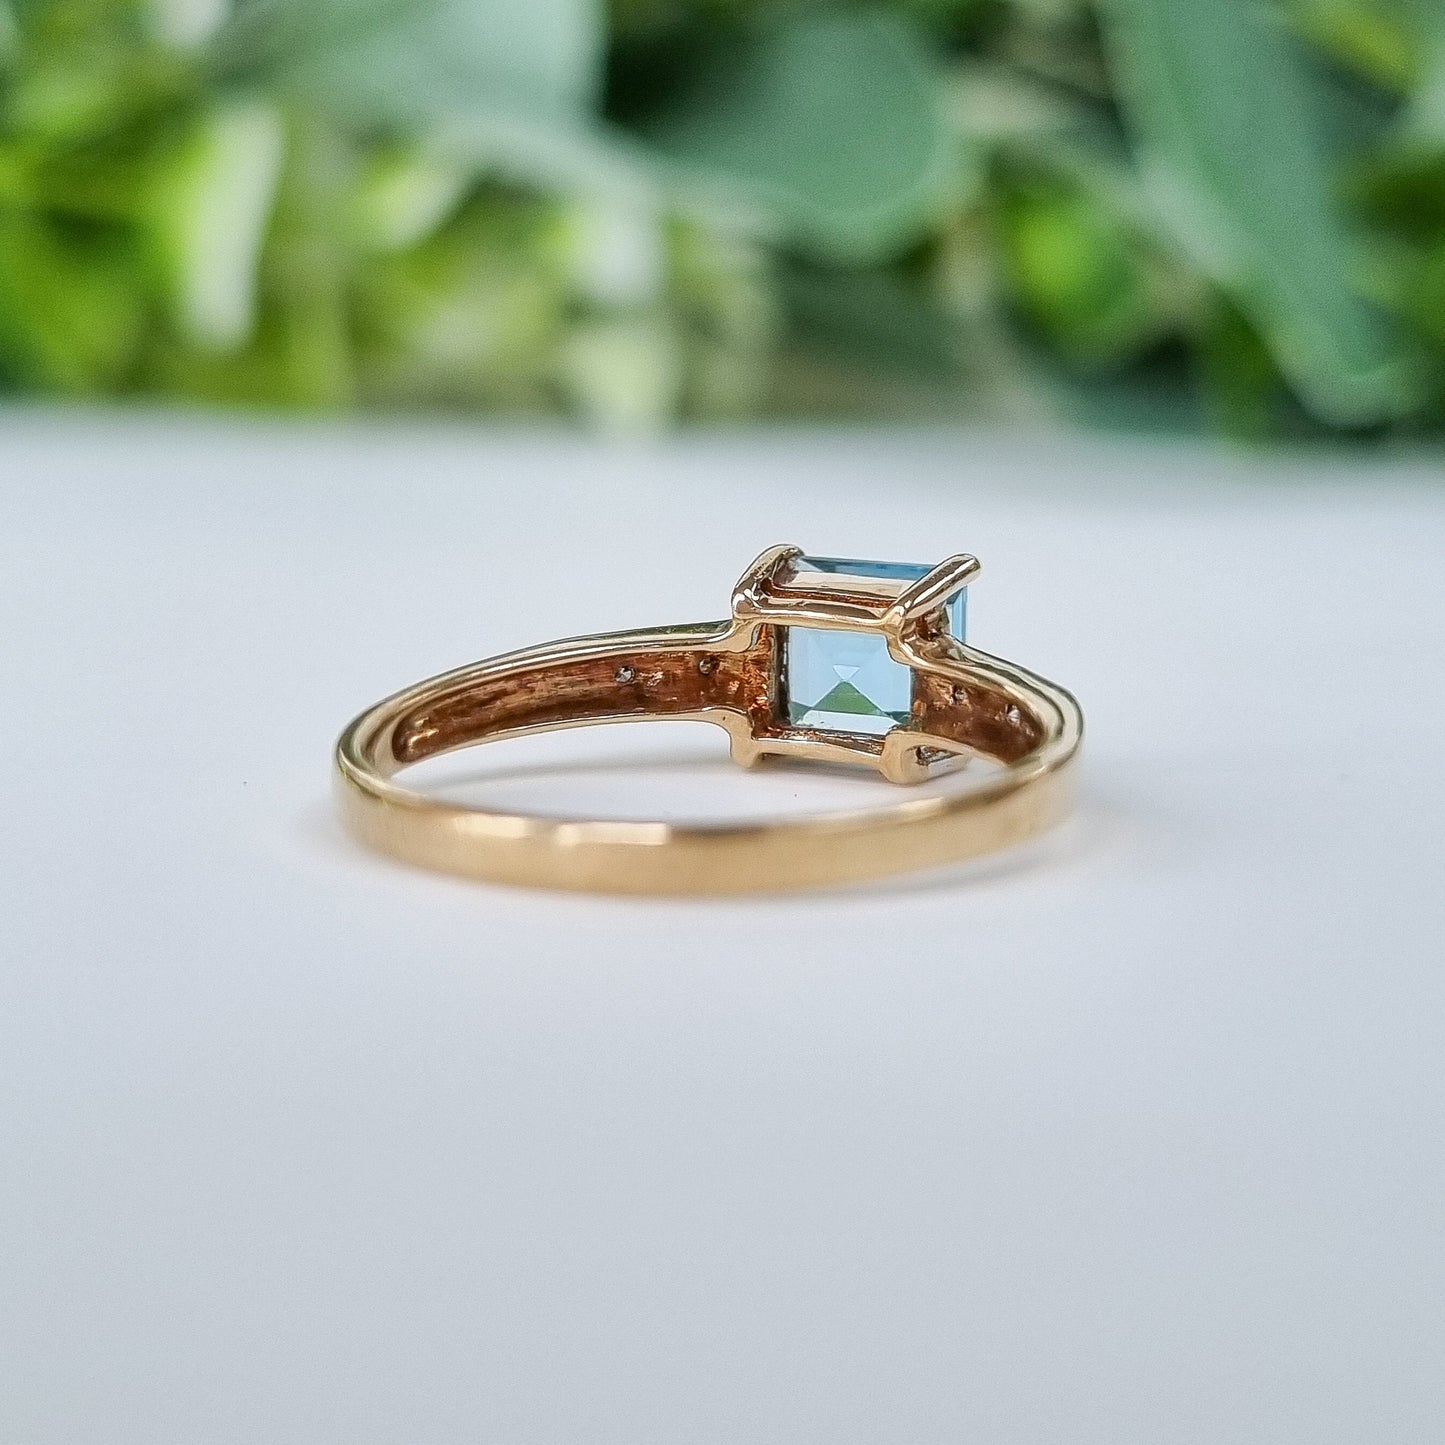 Vintage 9ct Topaz and Diamond Ring in 9ct Yellow Gold